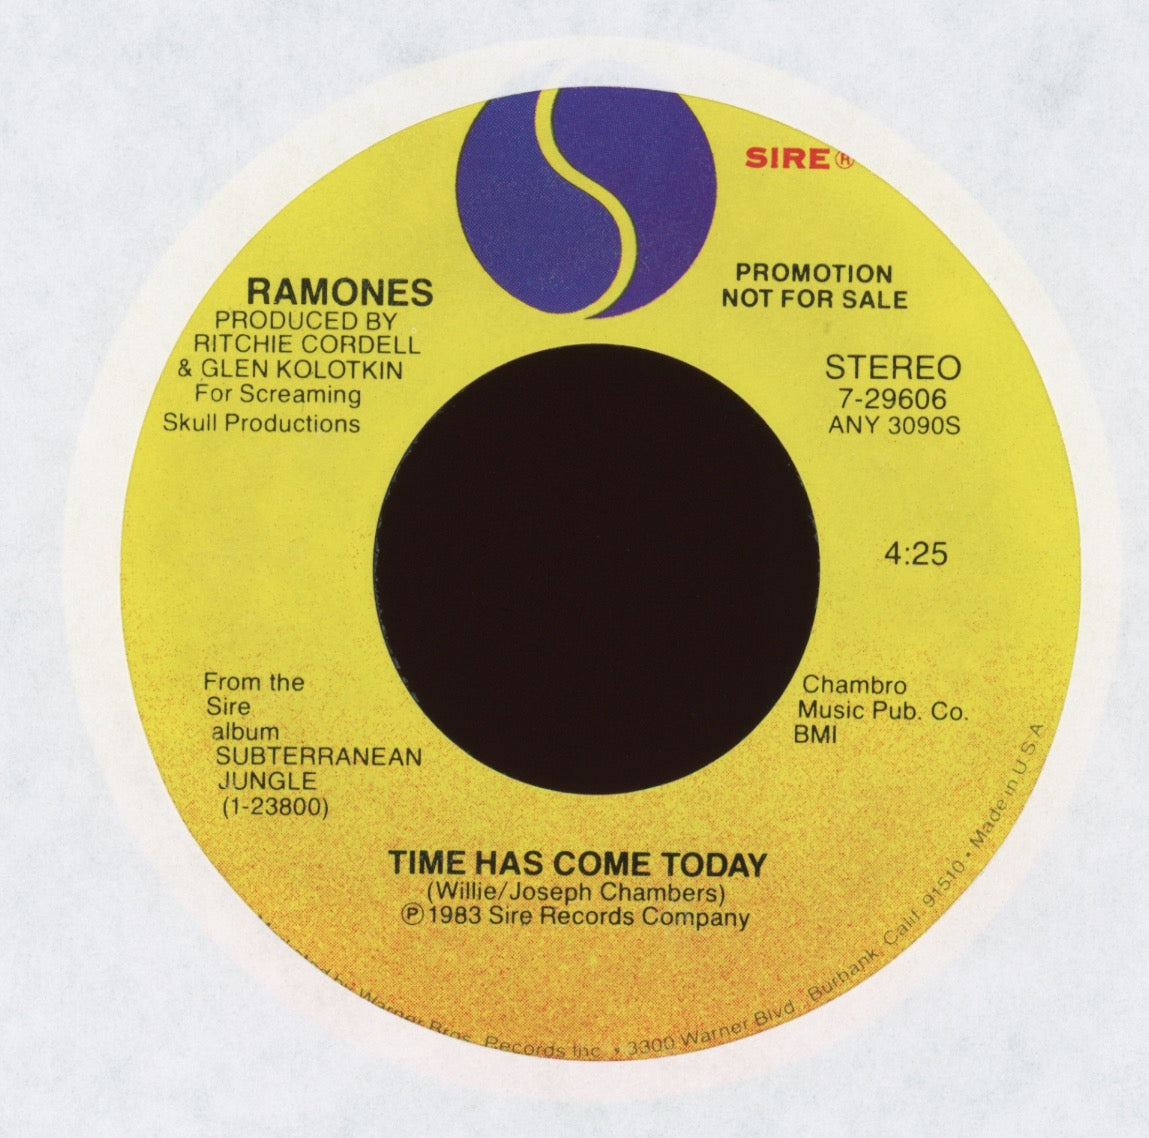 Ramones - Time Has Come Today on Sire Promo